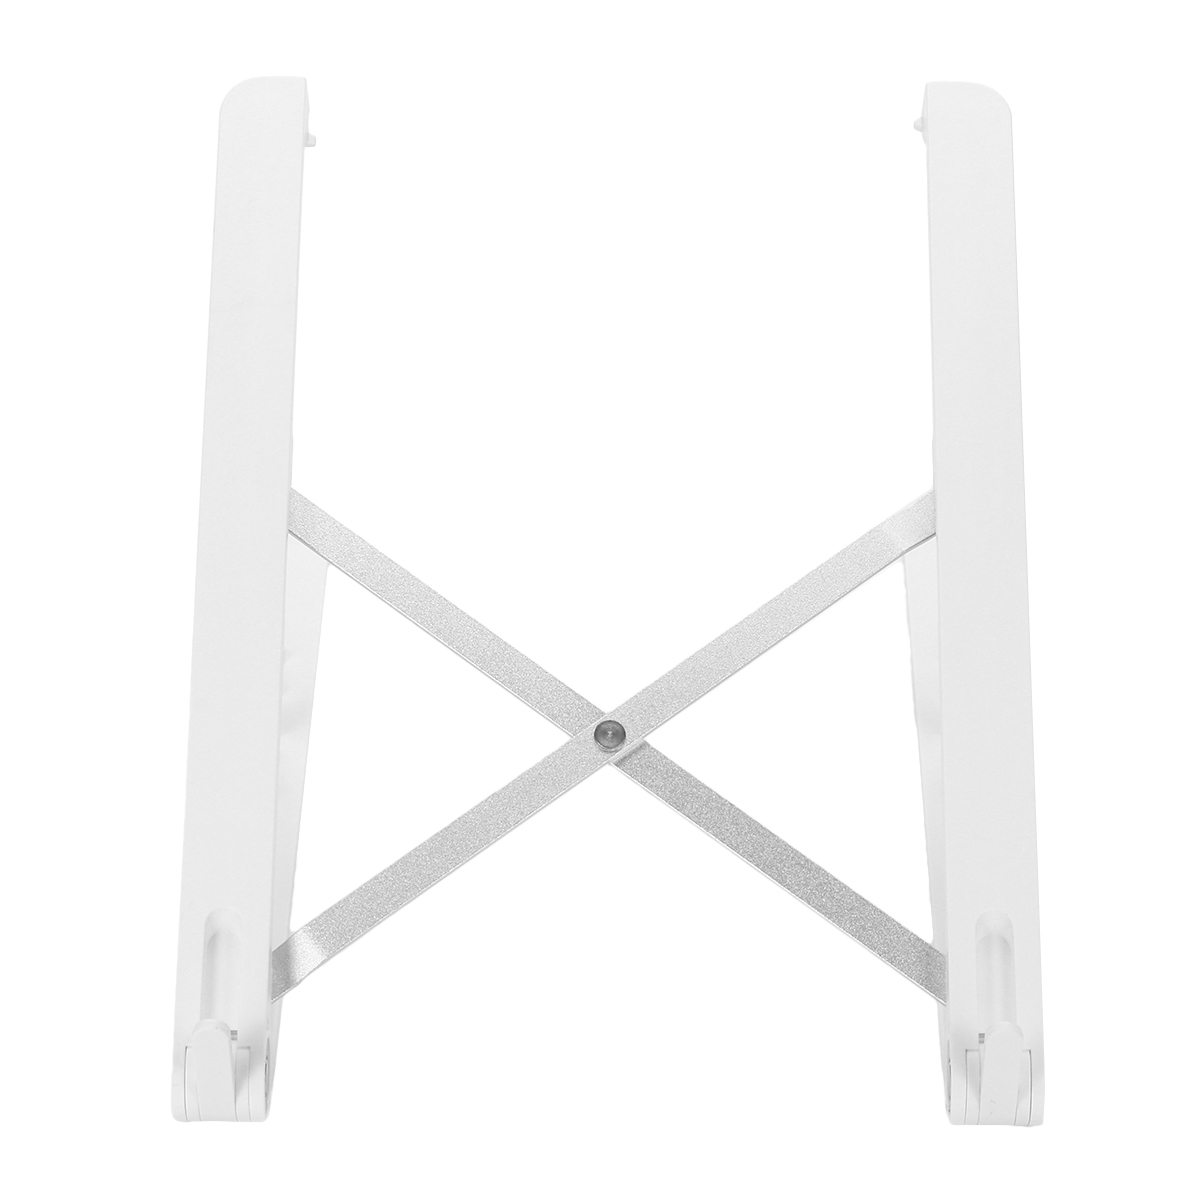 Foldable-5-Height-Adjustable-Laptop-Stand-Tablet-Stand-Heat-Dissipation-for-iPad-Macbook-below-17-in-1700967-7